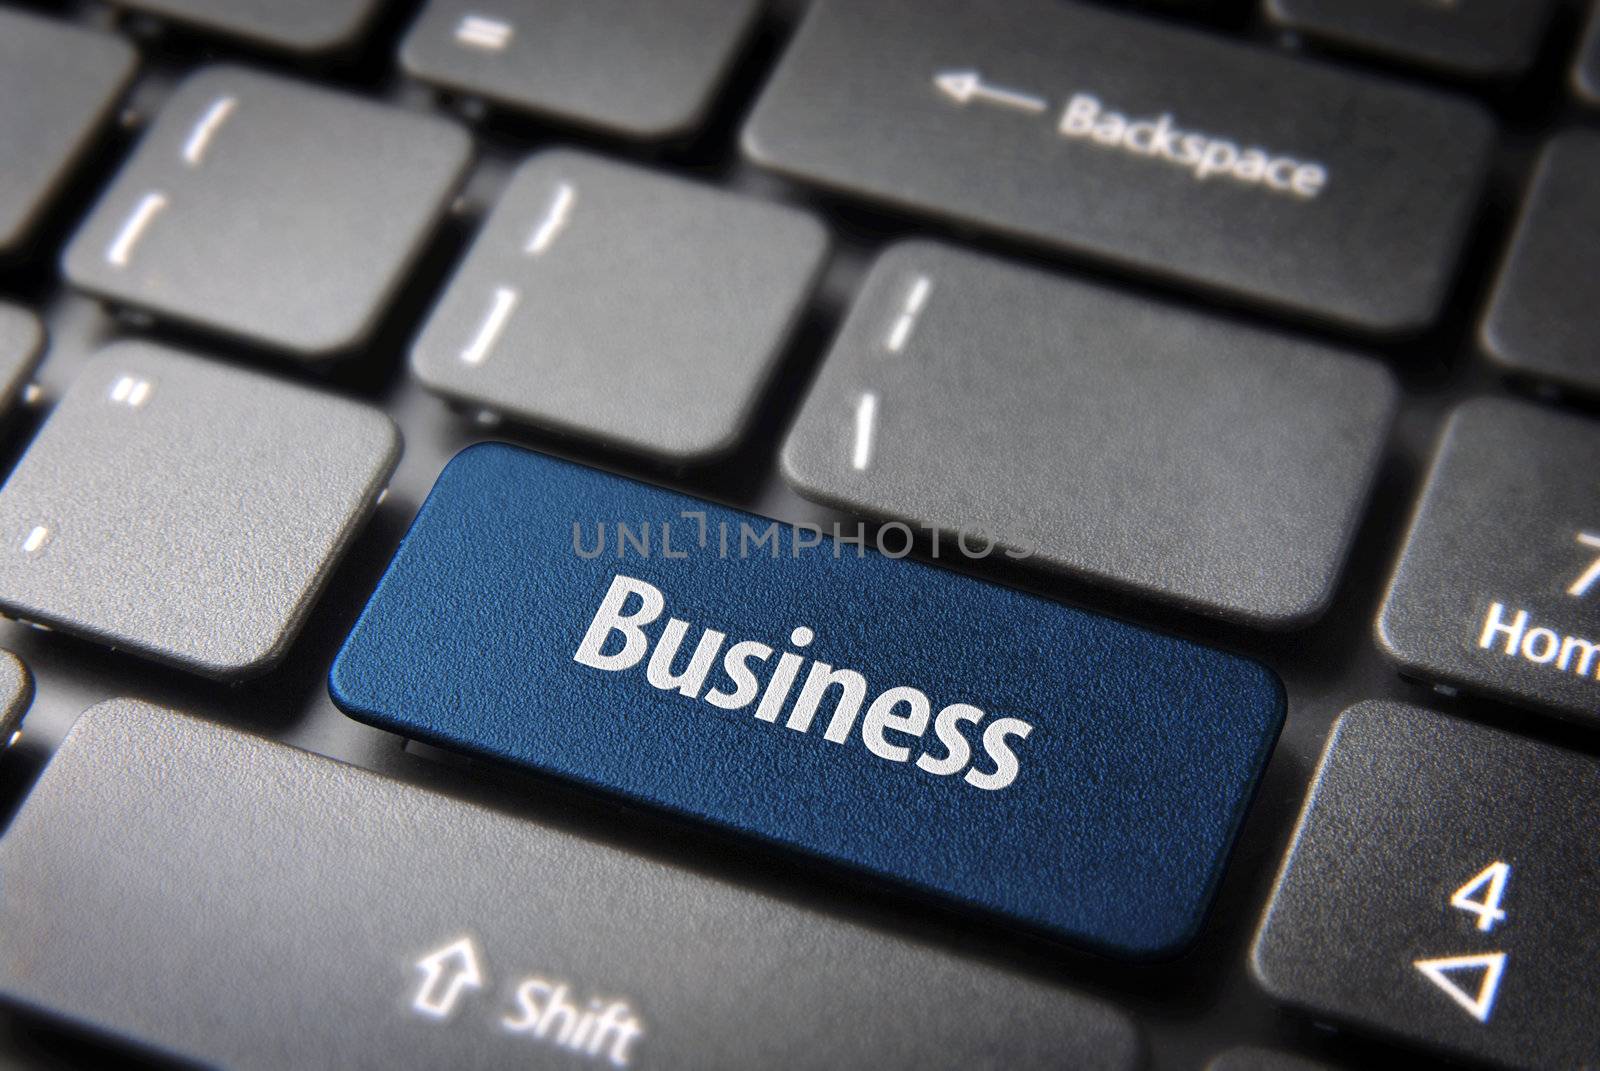 Internet business background by cienpies